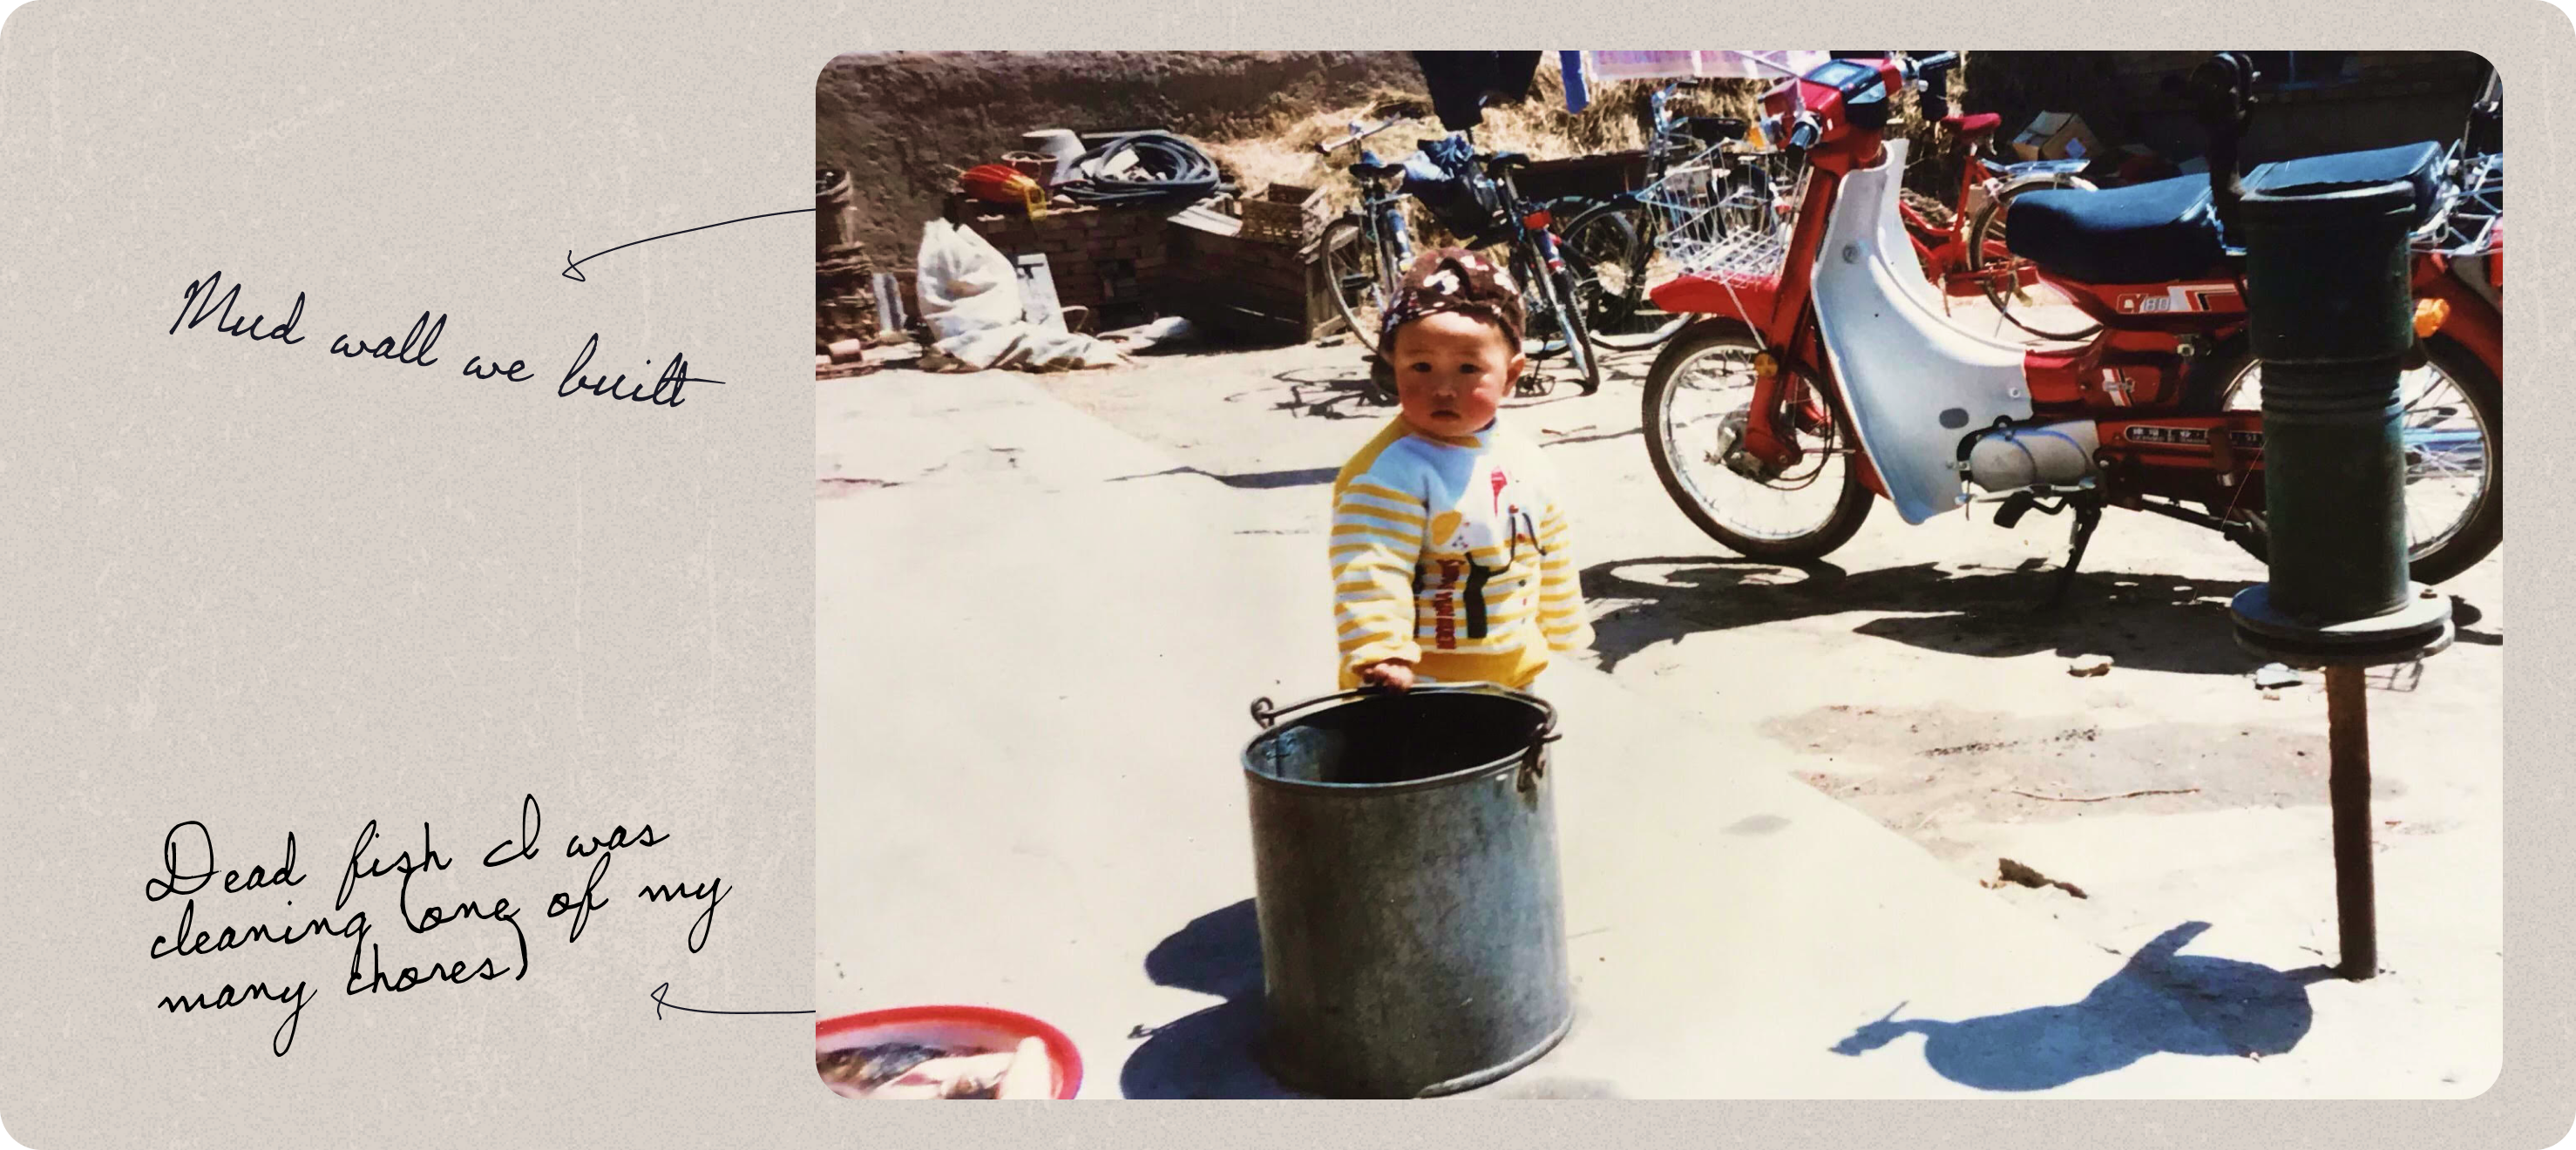 Archival family photograph of a young JJ Tang in Mongolia with a bucket of fish, motorcycle and mud wall in the background, as well as handwritten notes on the side | Memory Bank: JJ Tang, co-founder and CEO of Rootly | Mercury